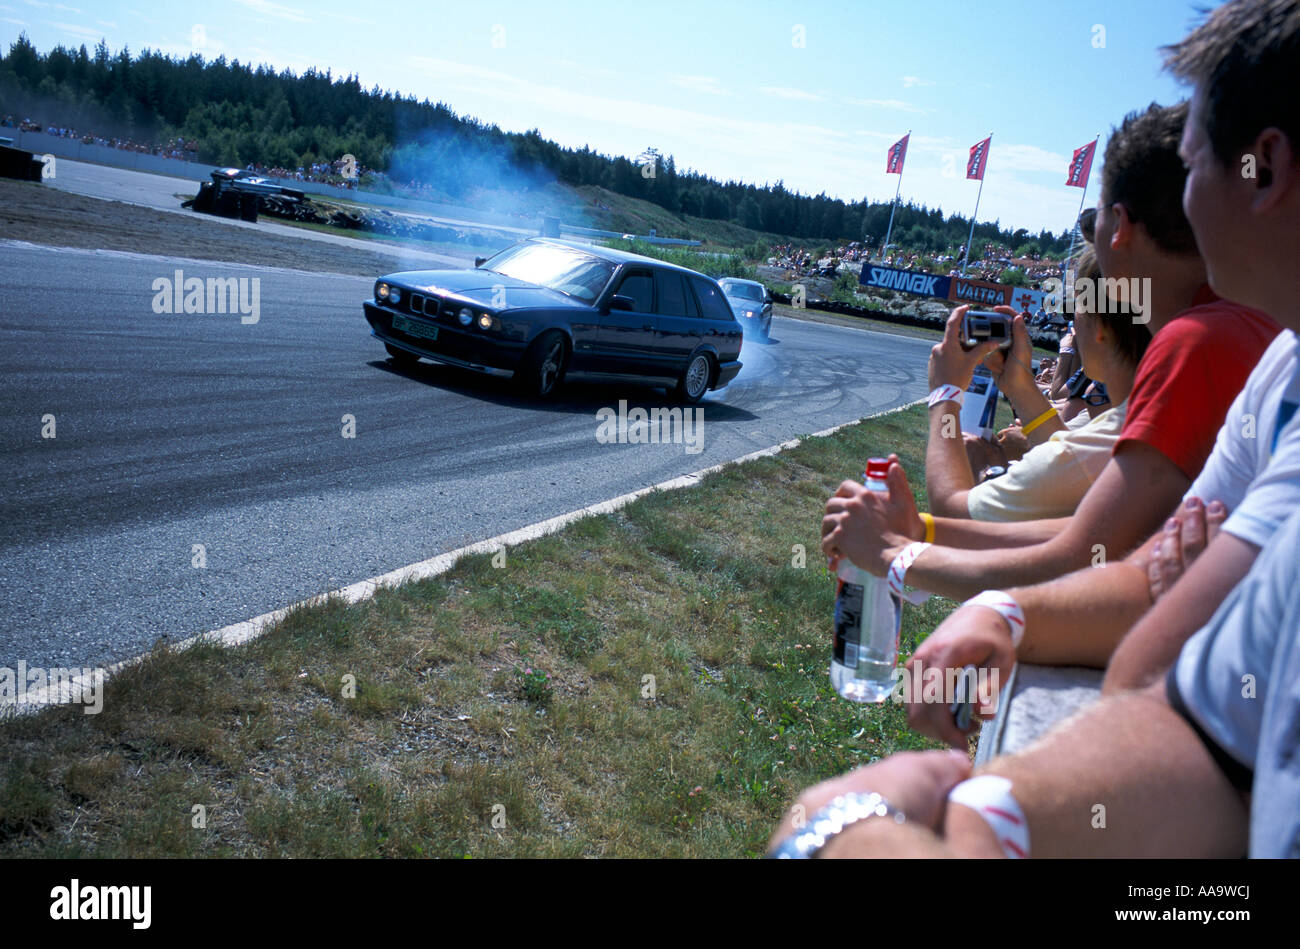 5 Series BMW skidding with the back end out at the street racing event Gatebil at Rudskogen in Norway Stock Photo